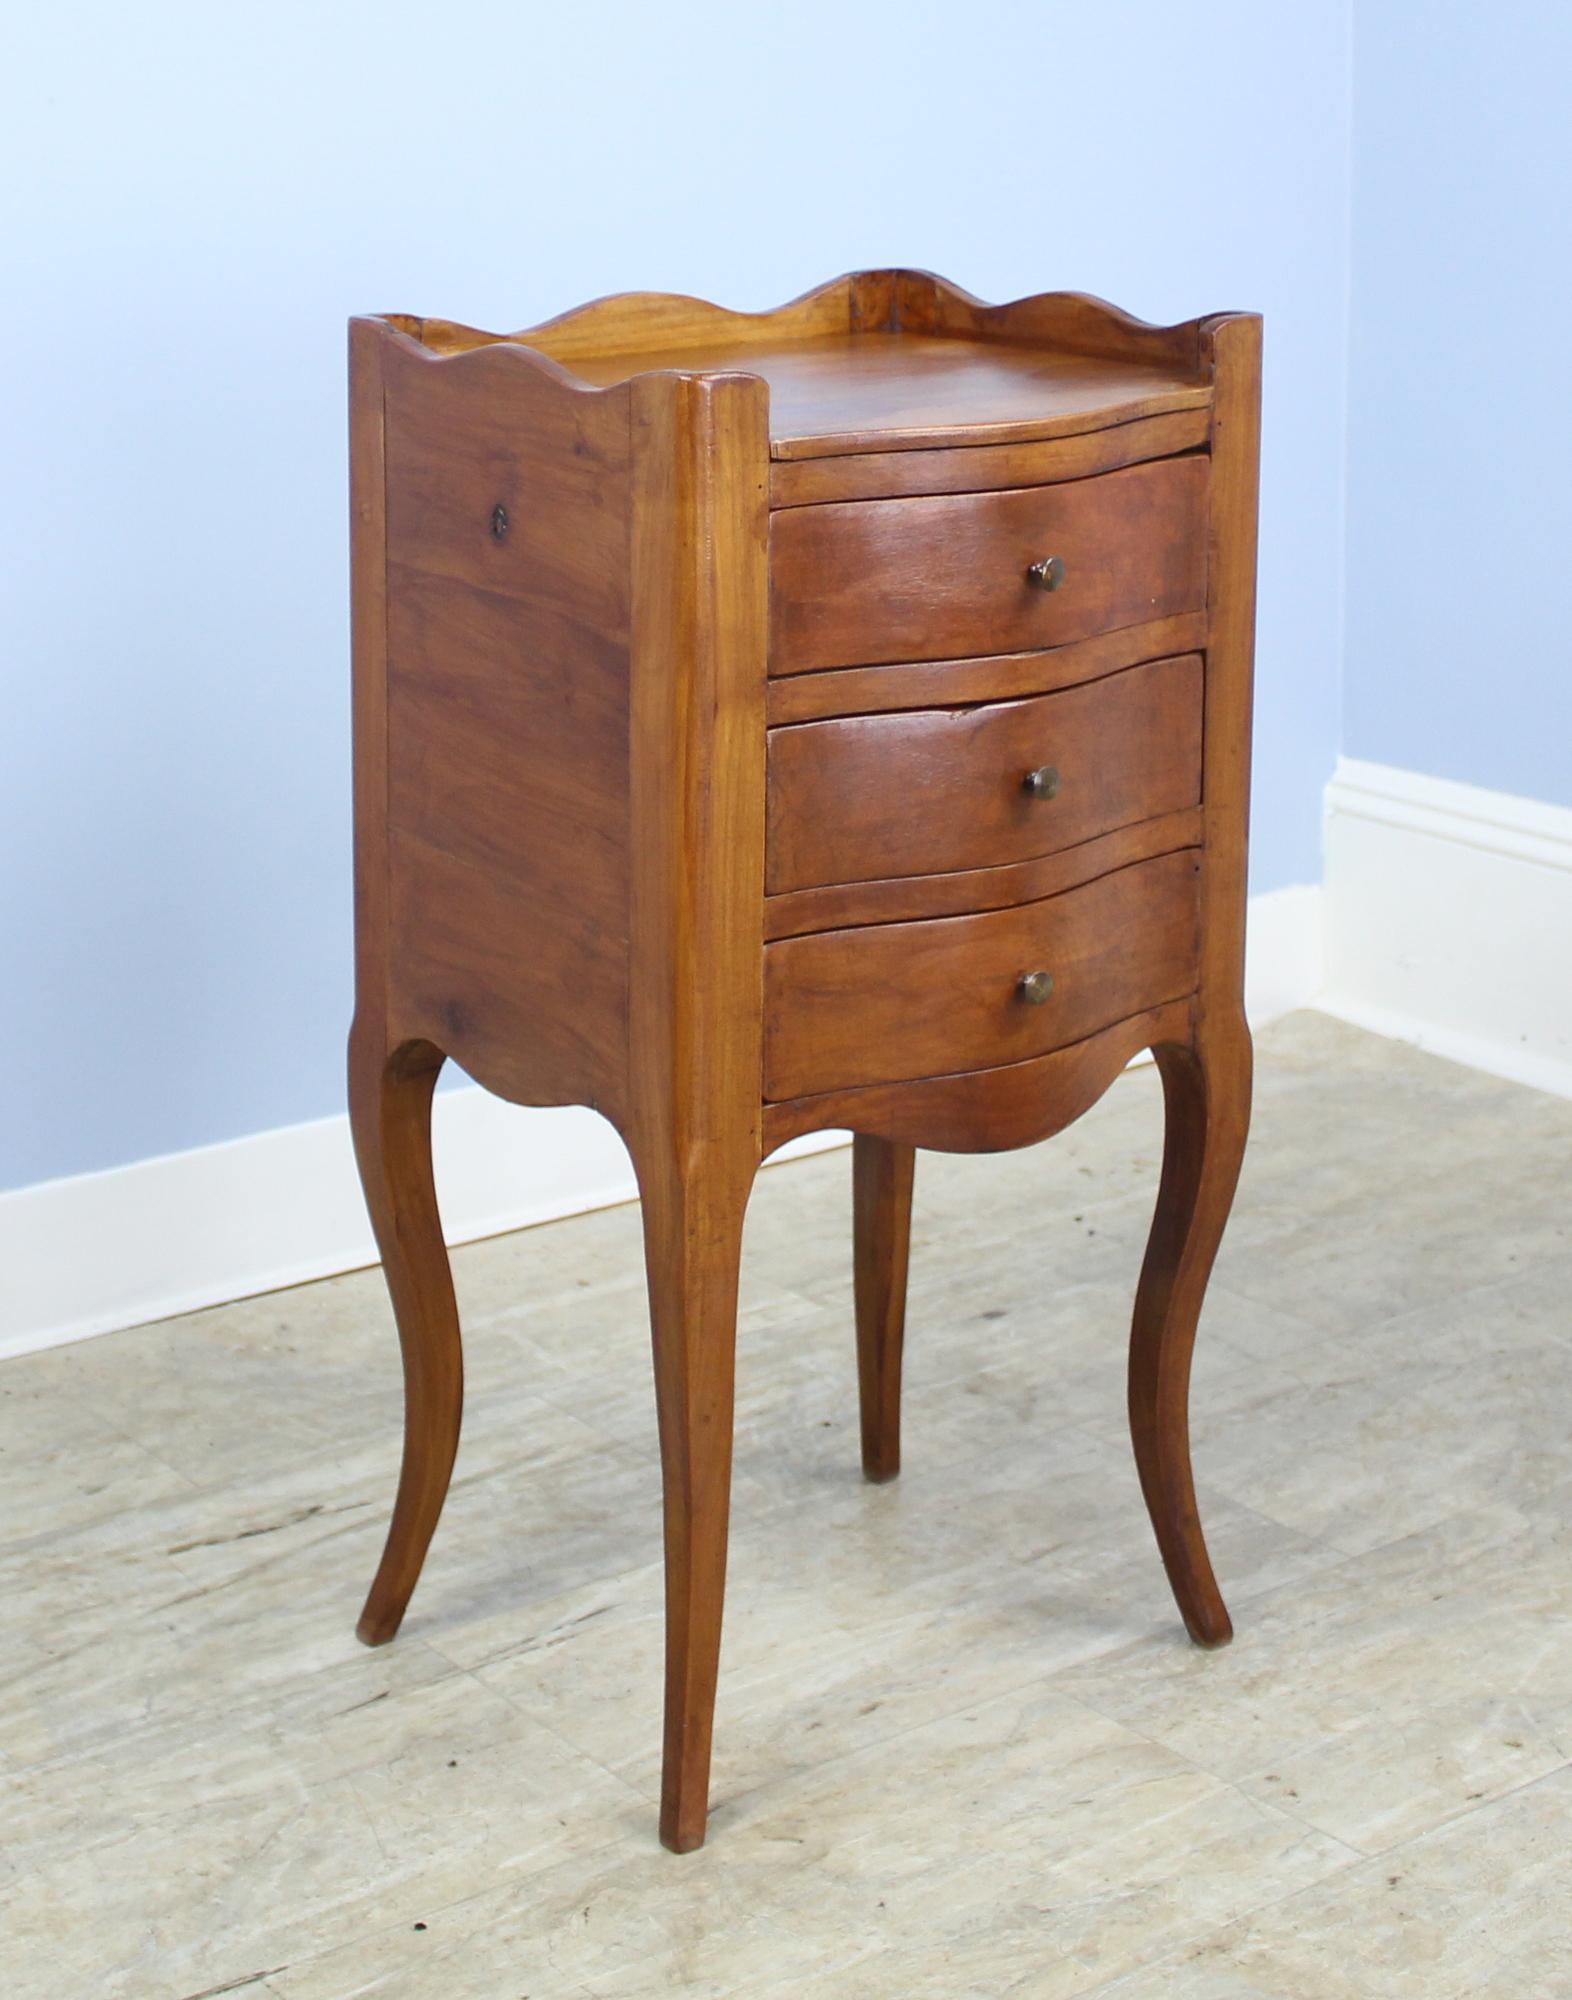 A pair of fine charming cherry nightstands with three sweet drawers and gracefully curved cabriole legs. The tops are in very good condition, with a small gallery on three of the four sides. Wonderful vibrant color and good cherry grain.